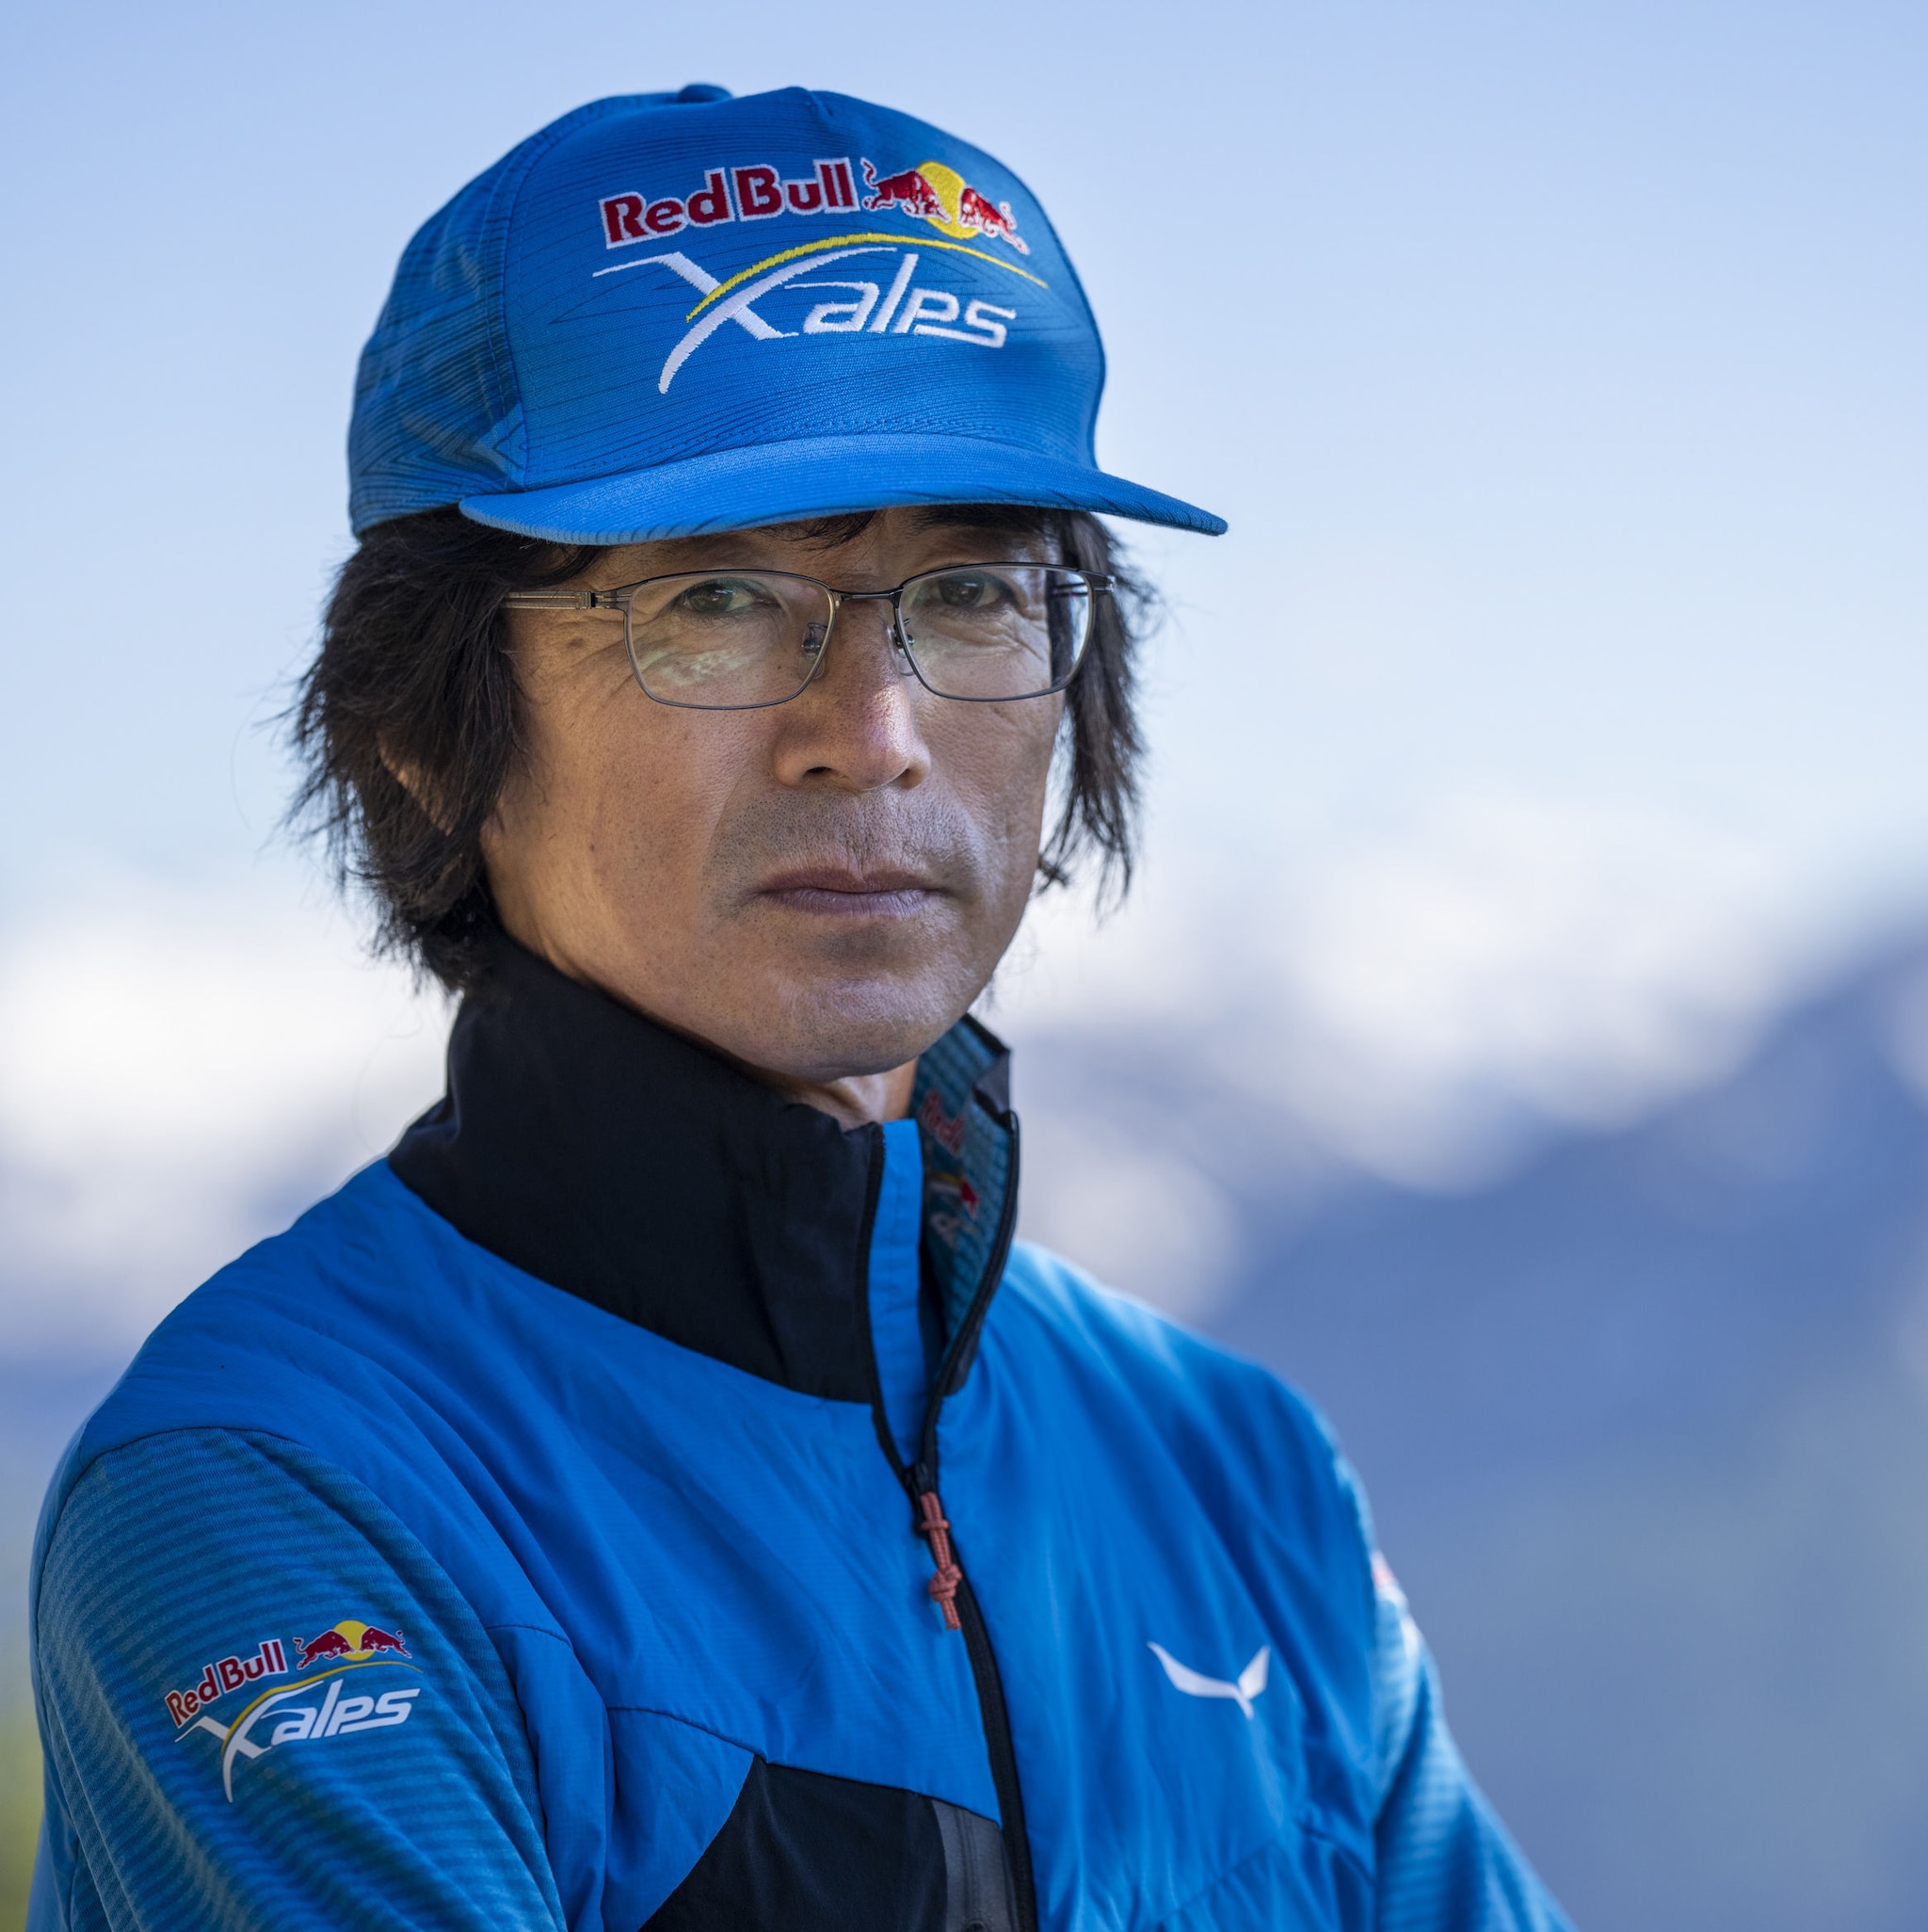 JPN1 performs during the Red Bull X-Alps pre-shooting in Kleinarl, Austria on June 14, 2021.